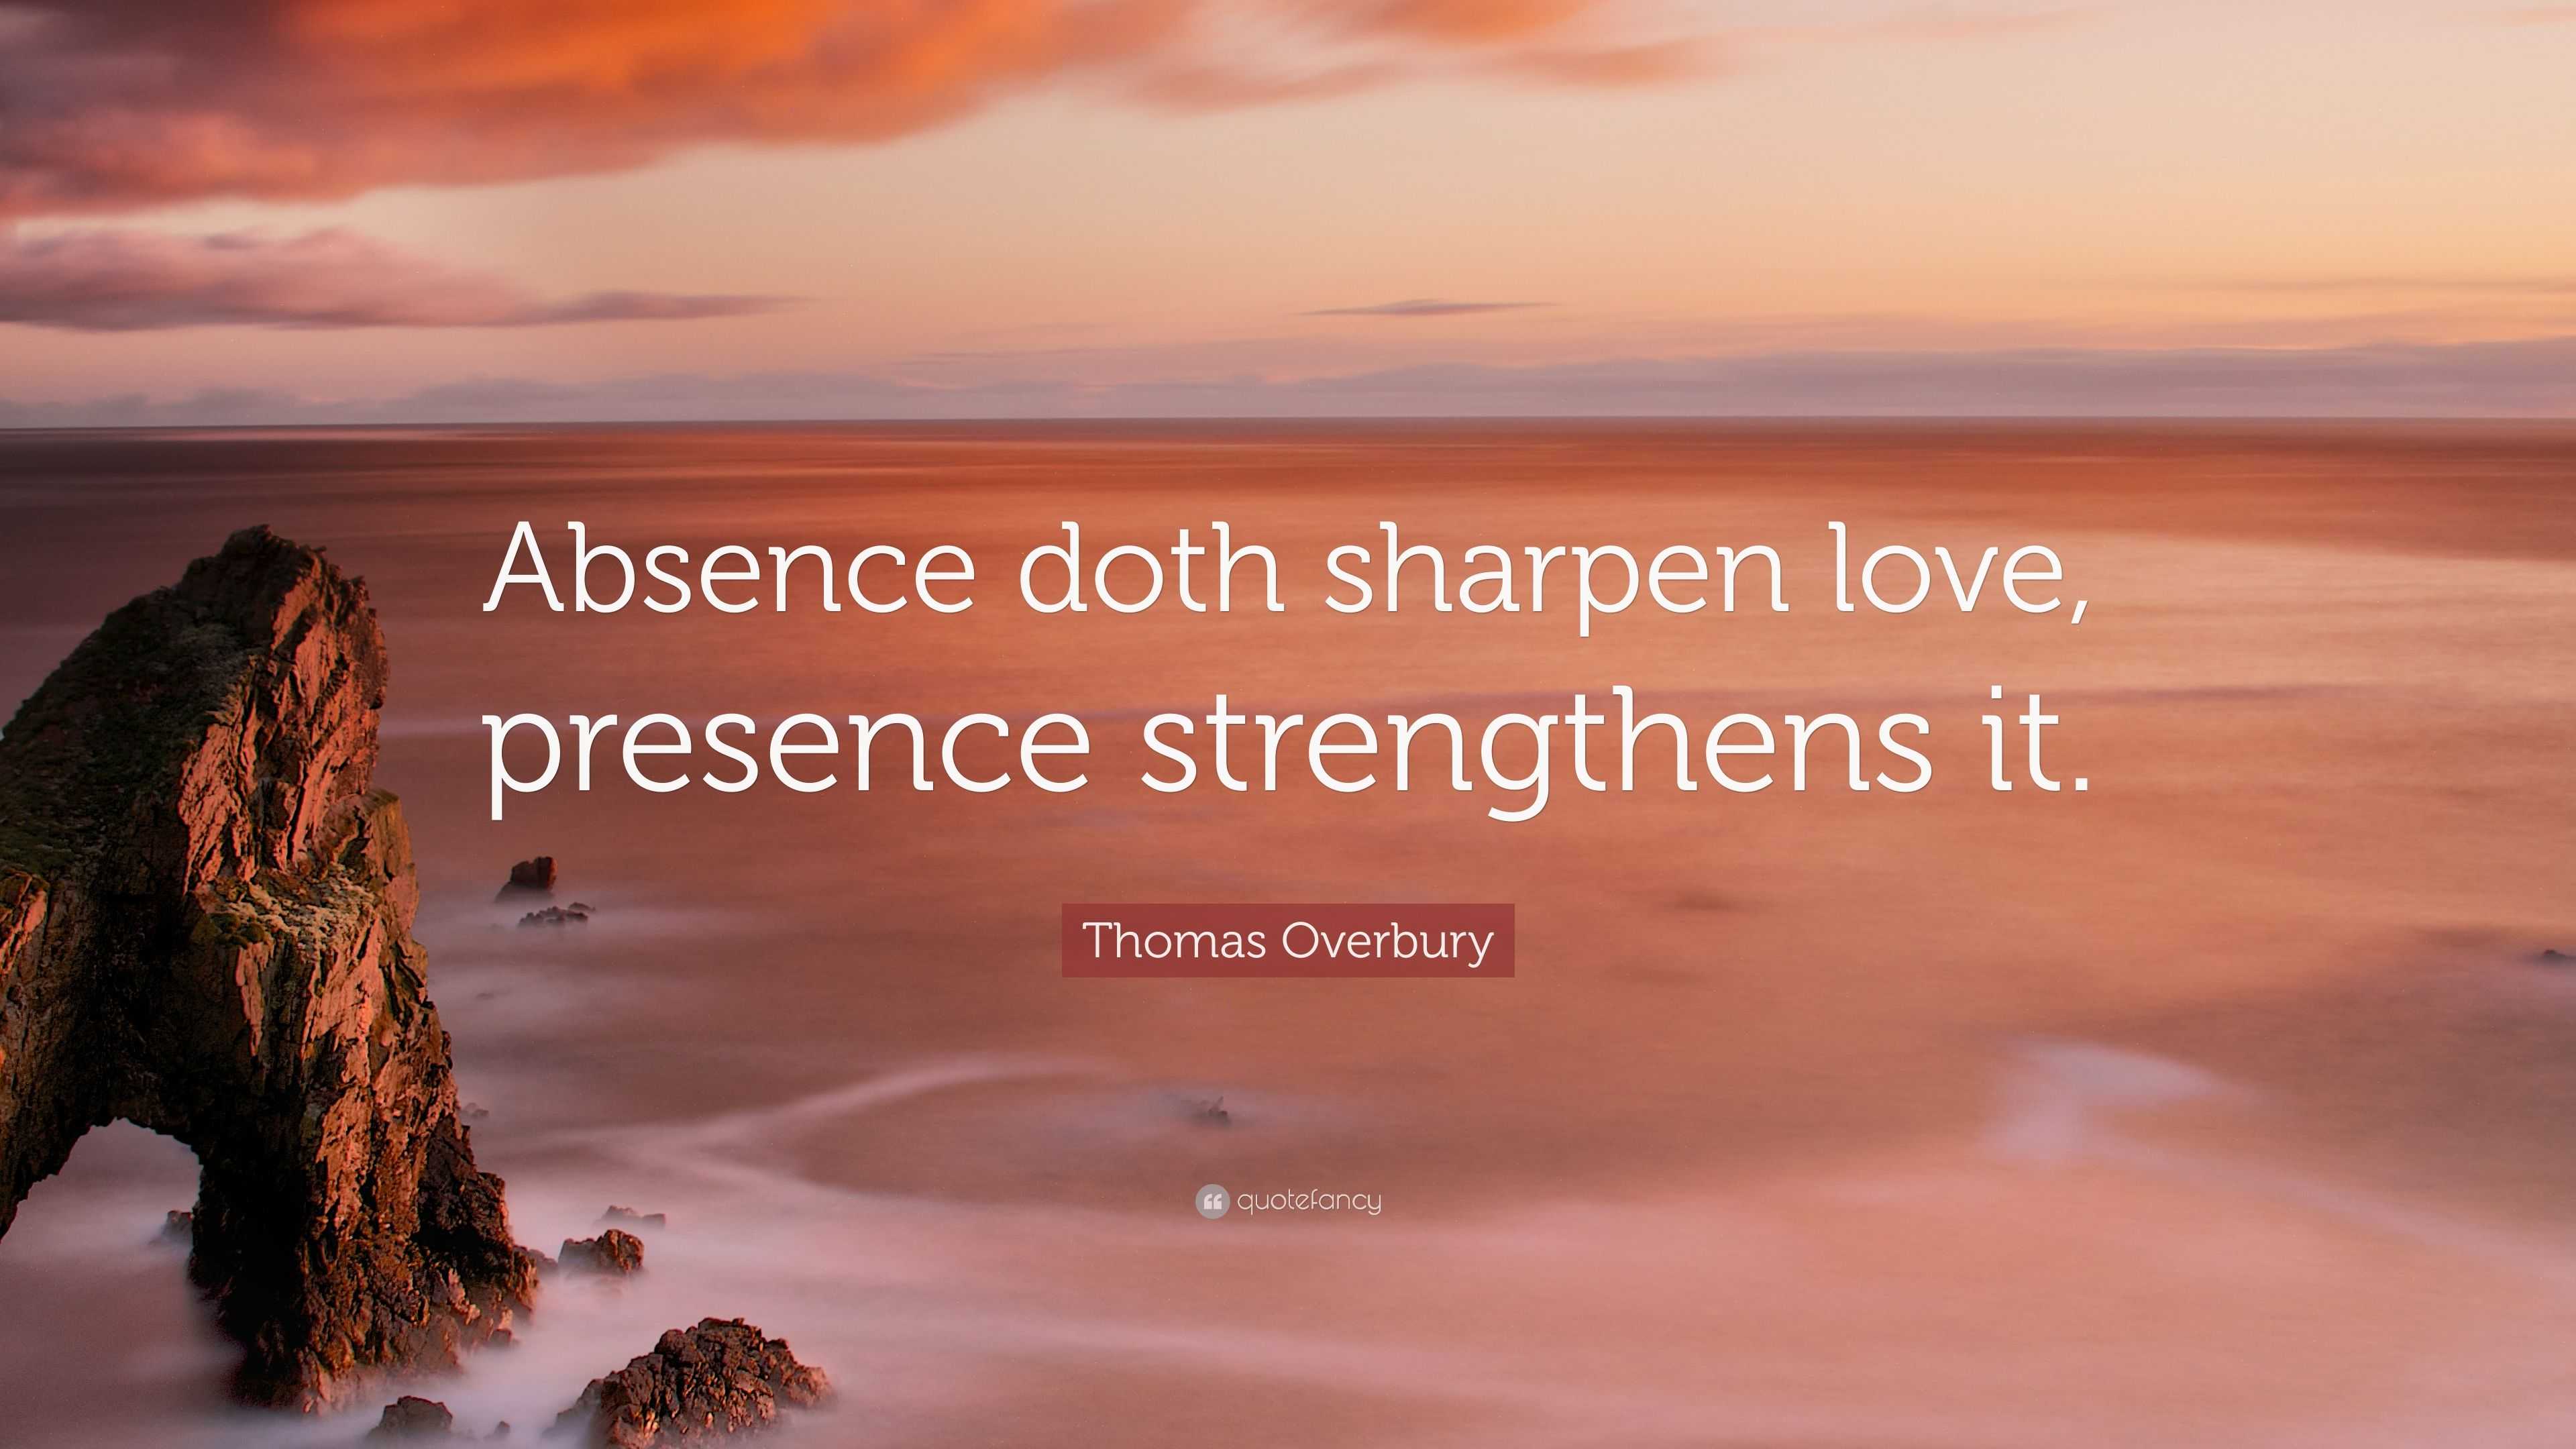 Thomas Overbury Quote Absence Doth Sharpen Love Presence Strengthens It